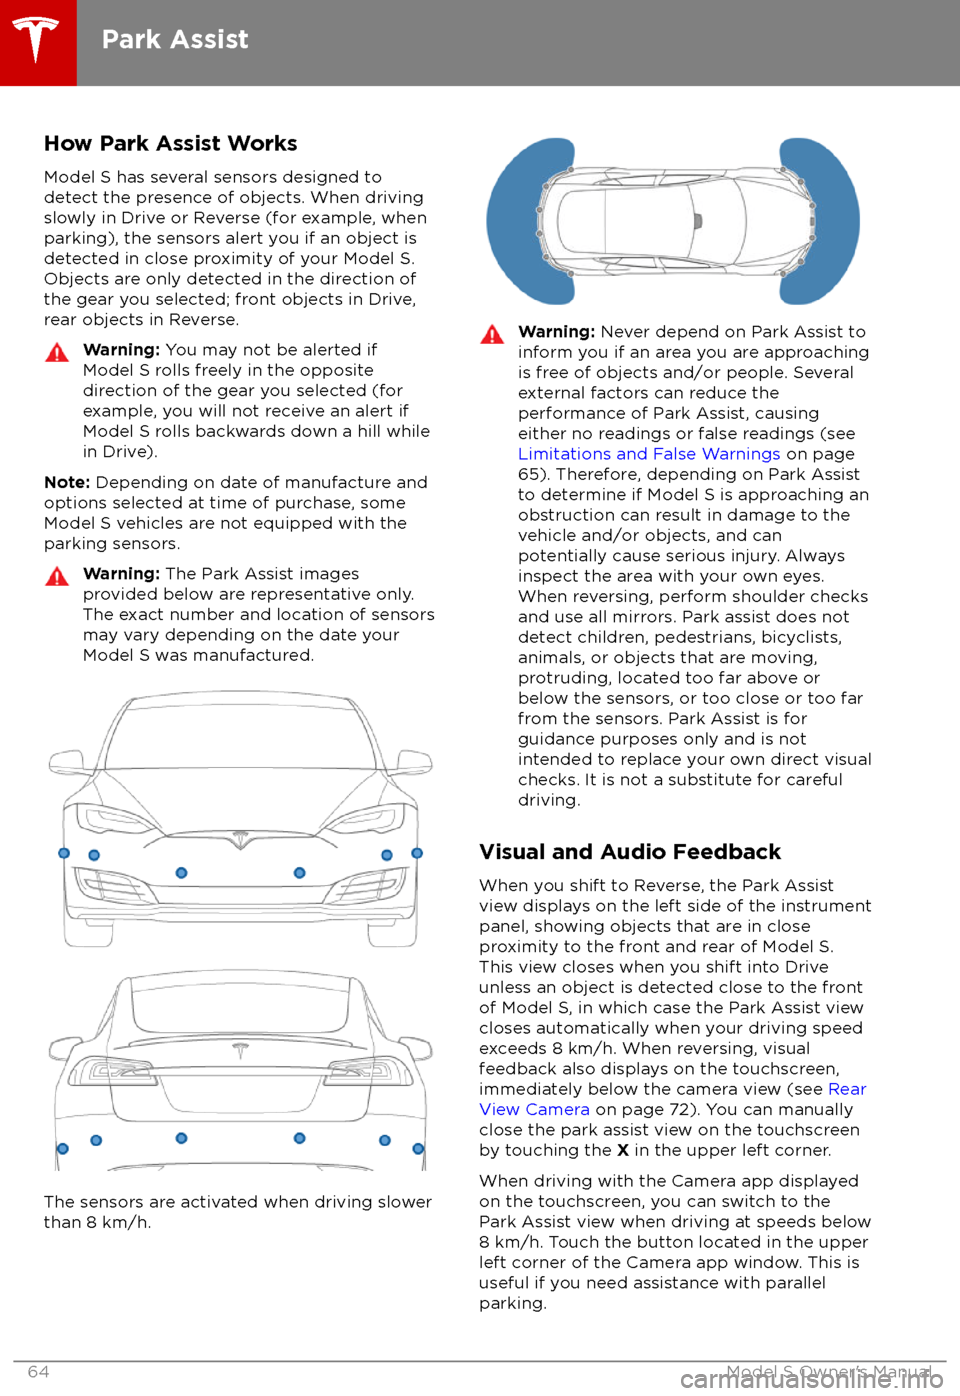 TESLA MODEL S 2018  Owners Manual  How Park Assist WorksModel S has several sensors designed todetect the presence of objects. When drivingslowly in Drive or Reverse (for example, when
parking), the sensors alert you if an object is de